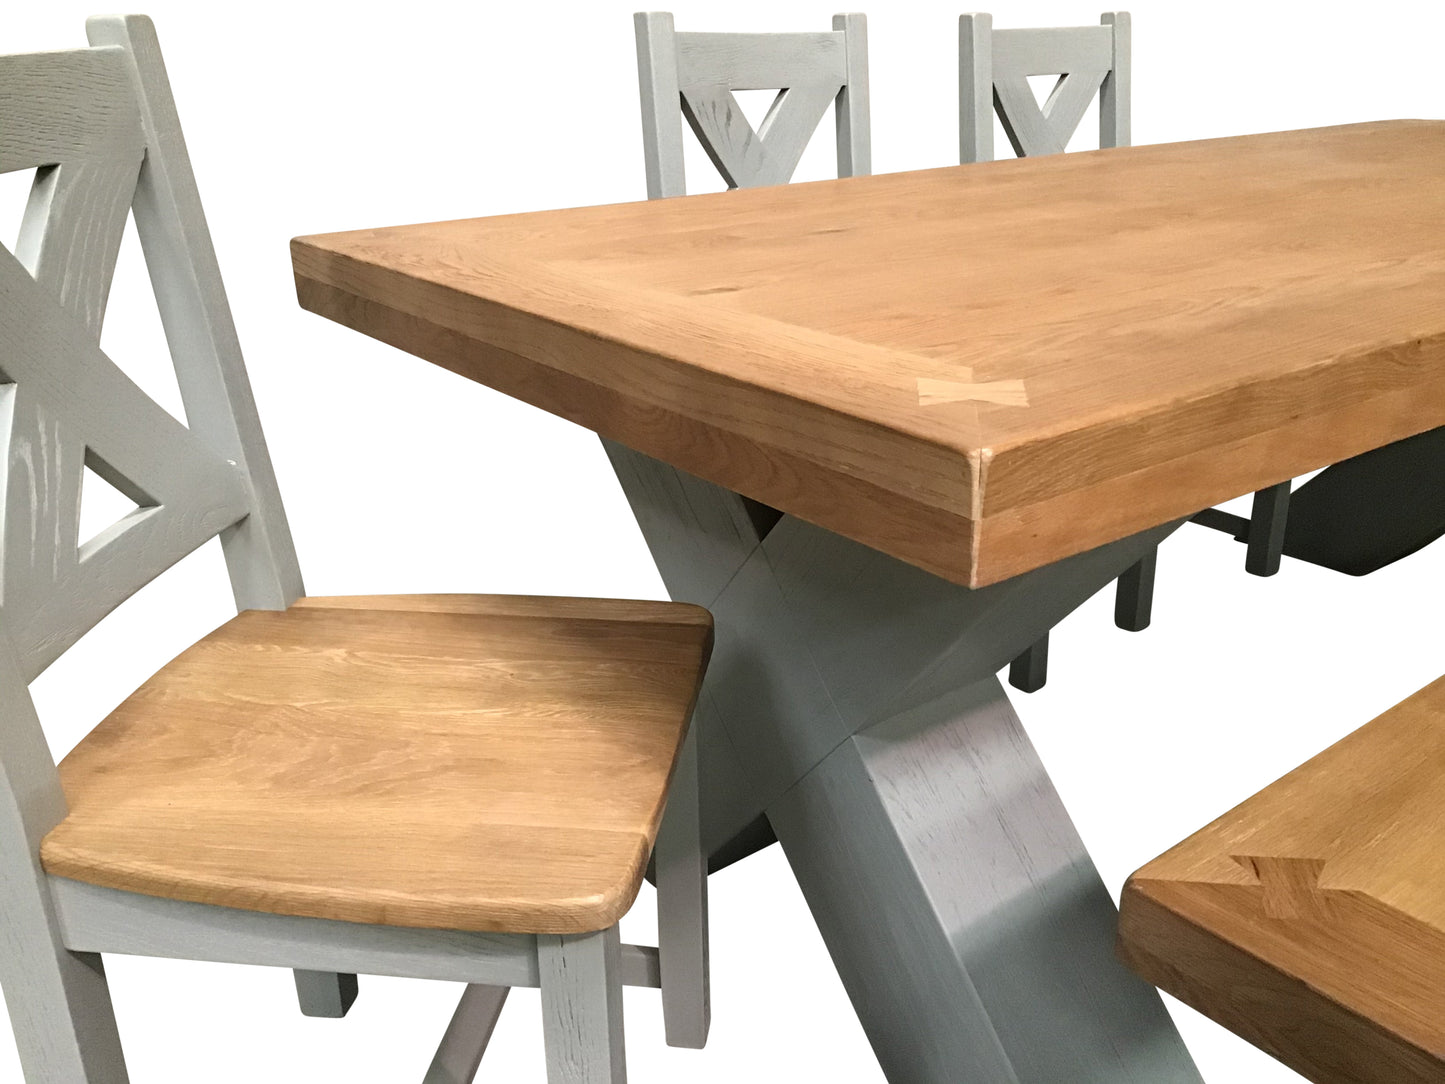 Maximus Oak 2.3m Dining Set painted French Grey with Maximus Dining Chairs